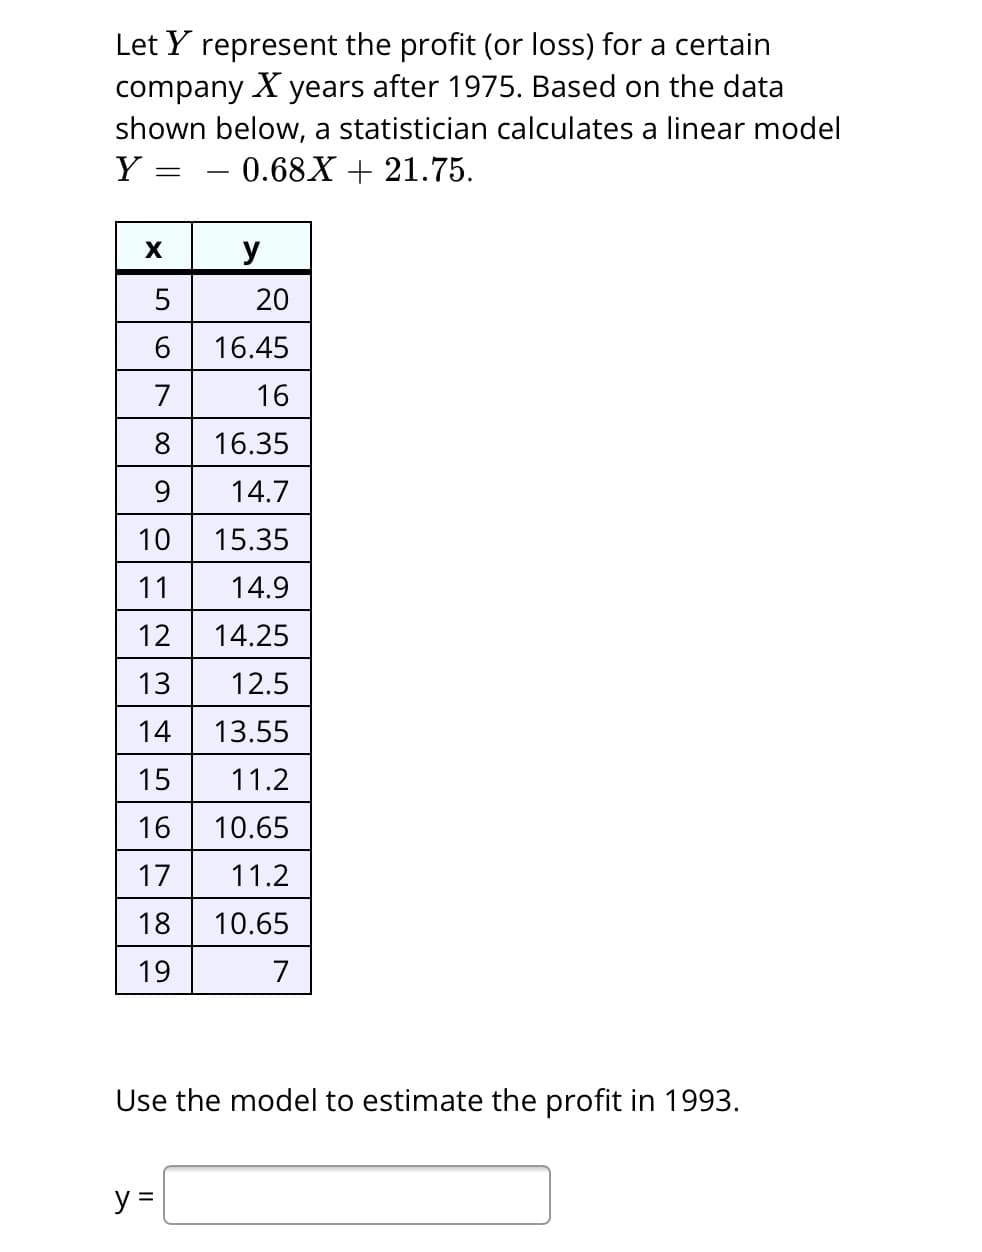 Let Y represent the profit (or loss) for a certain
company X years after 1975. Based on the data
shown below, a statistician calculates a linear model
0.68X+21.75.
Y
=
X
5
6
7
8
9
10
11
12
13
14
15
16
17
18
19
y
y =
20
16.45
16
16.35
14.7
15.35
14.9
14.25
12.5
13.55
11.2
10.65
11.2
10.65
7
Use the model to estimate the profit in 1993.